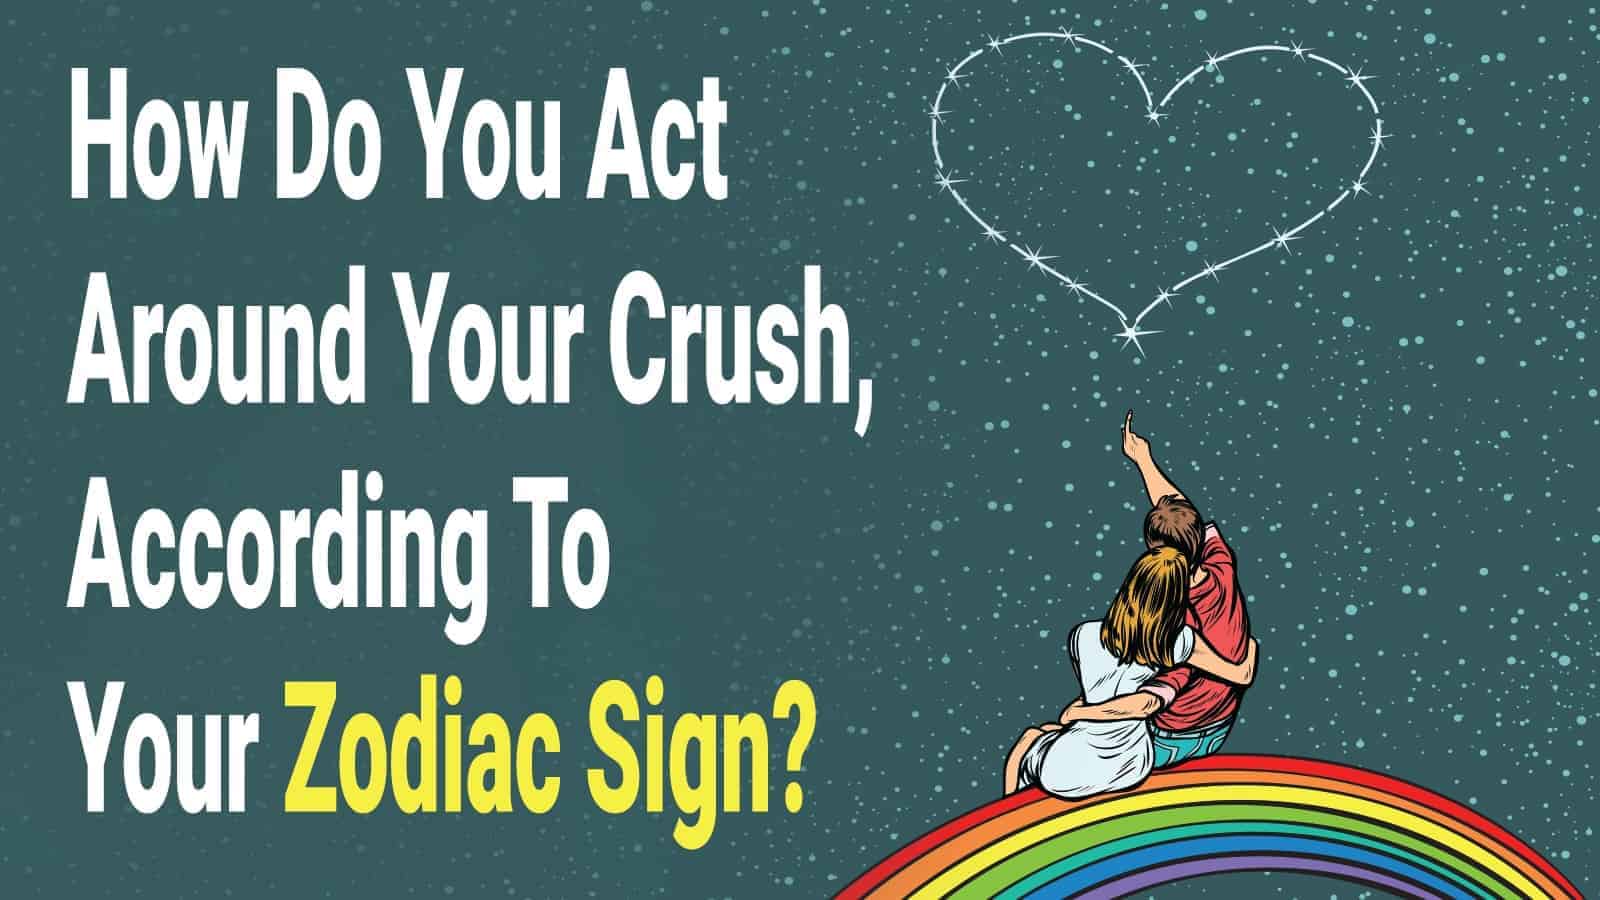 How Do You Act Around Your Crush, According To Your Zodiac Sign?